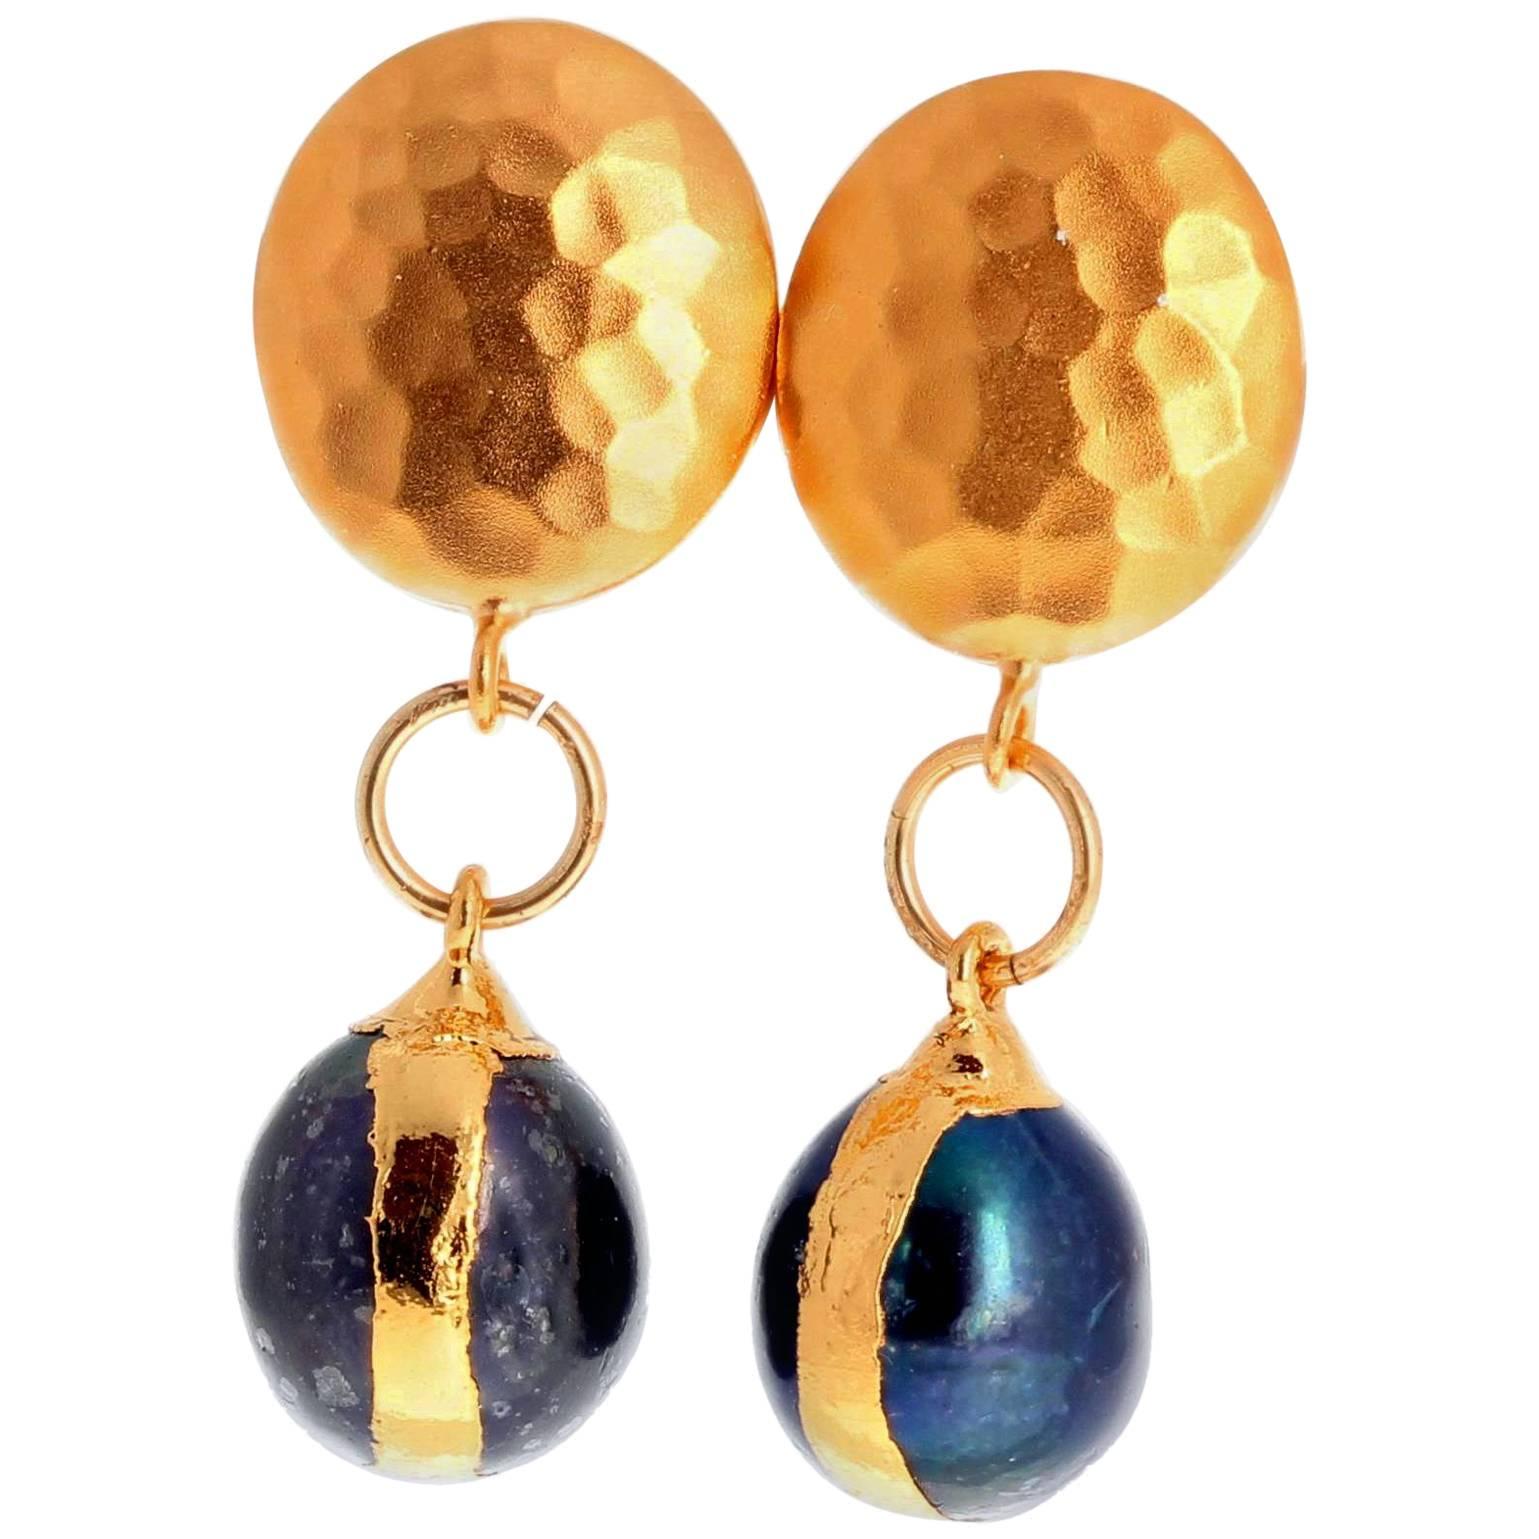 Glowing bluish Abalone Fireball Pearls dangle elegantly from these Vermeil (sterling silver gold plated) earrings (approximately 1.64 inches from top of clip to bottom of Pearl). 